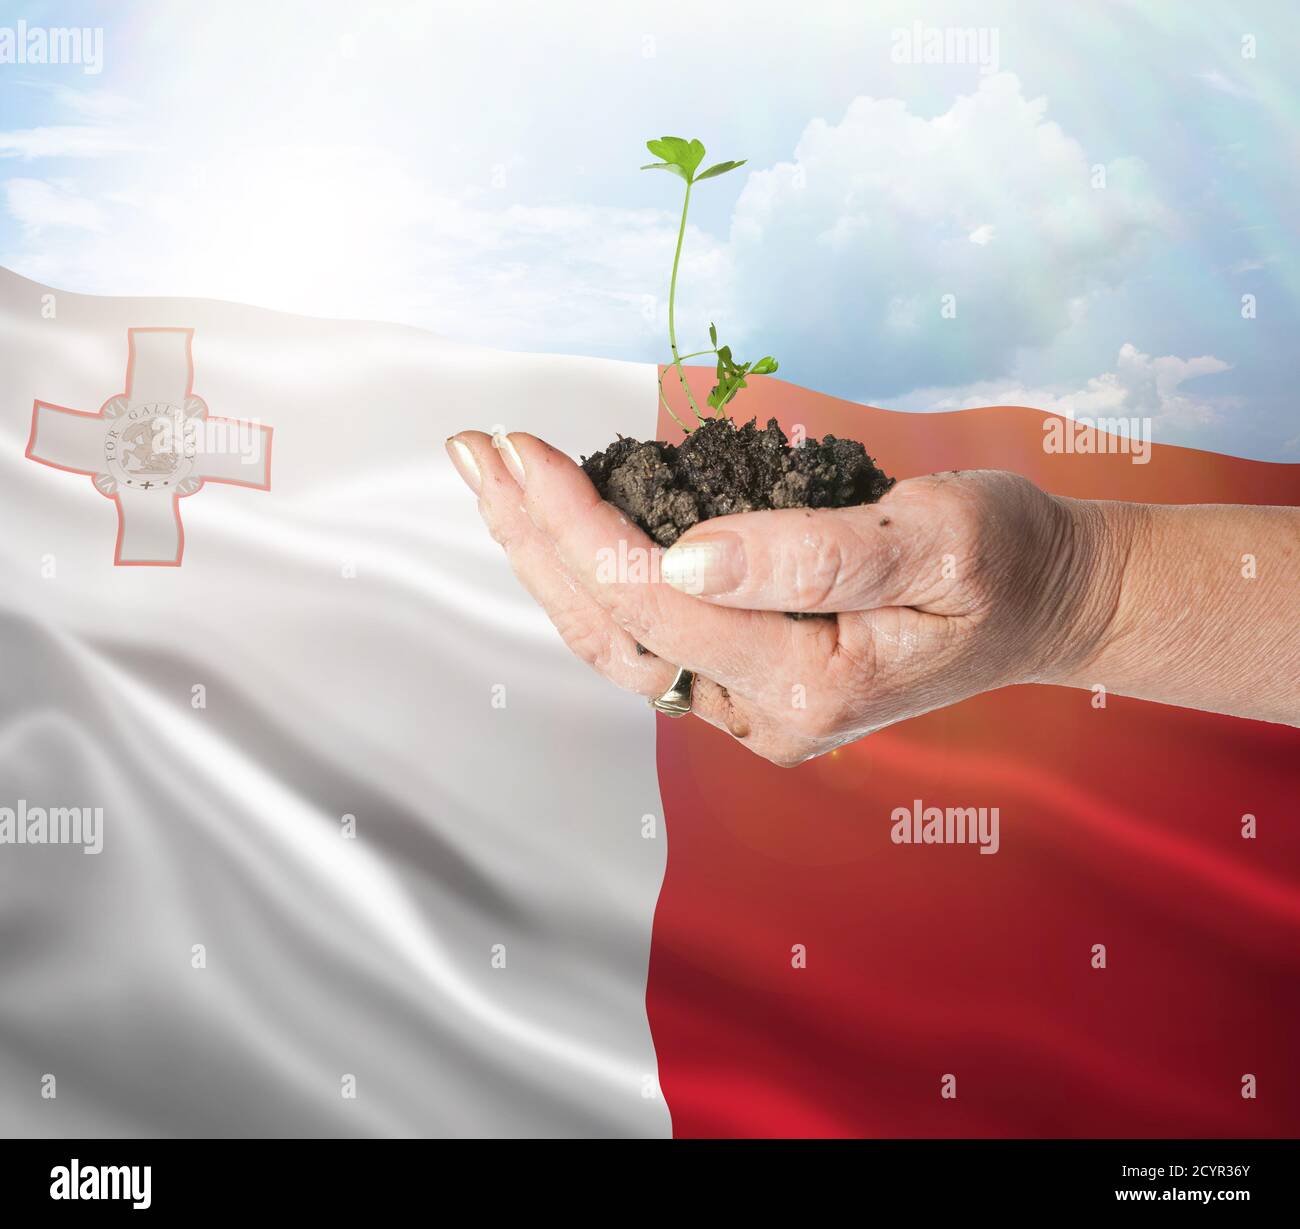 Malta growth and new beginning. Green renewable energy and ecology concept. Hand holding young plant. Stock Photo